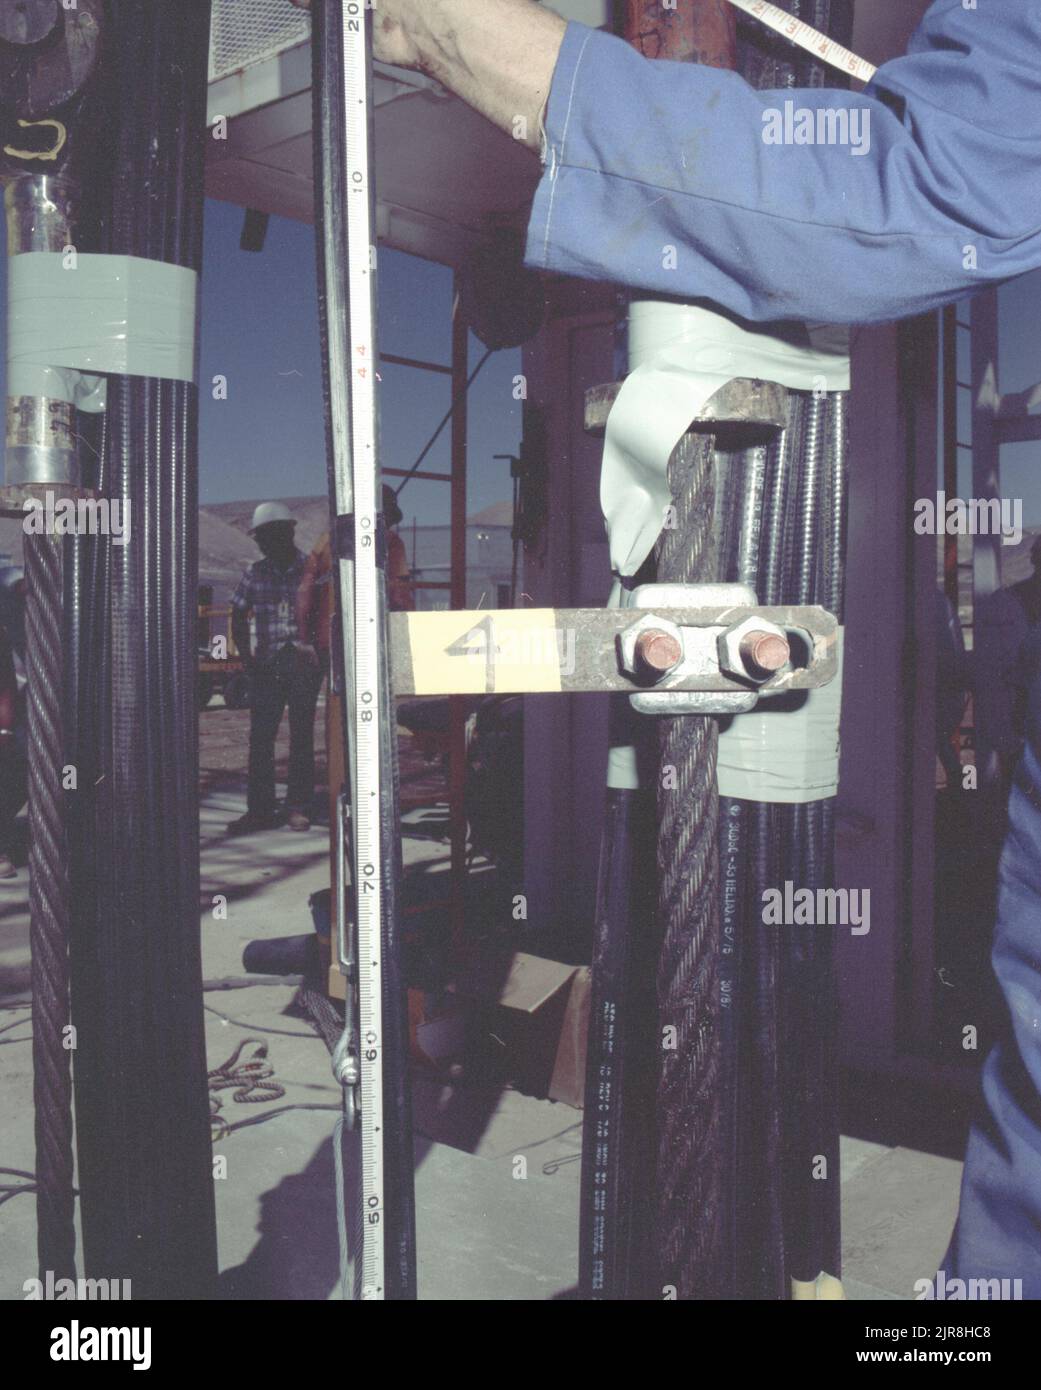 A771176 U7AE STRAKE DOWNHOLE OPERATION JOHN BROUILLARD (PROJECT ENGINEER) JUL 14 77 EG&G/NTS PHOTO LAB Publication Date: 7/14/1977  BROUILLARD, JOHN; CABLES, COAXIAL; CONSTRUCTION HATS; DOWNHOLE OPERATION; EDGERTON, GERMESHAUSEN & GRIER; EG&G; EQUIPMENT & INSTRUMENTS; INSTRUMENTS & EQUIPMENT; MEASURED; MEASUREMENT & RELATIONSHIP; MEASURING DEVICES (EXC UTENSIL; NEVADA; NEVADA TEST SITE; NTS; NUCLEAR ENERGY TECHNOLOGY; NUCLEAR TESTING; NUCLEAR TESTS; STRAKE; TAPE MEASURES; TEST SITES; UGT; UNDERGROUND TESTING  historical images. 1972 - 2012. Department of Energy. National Nuclear Security Admin Stock Photo